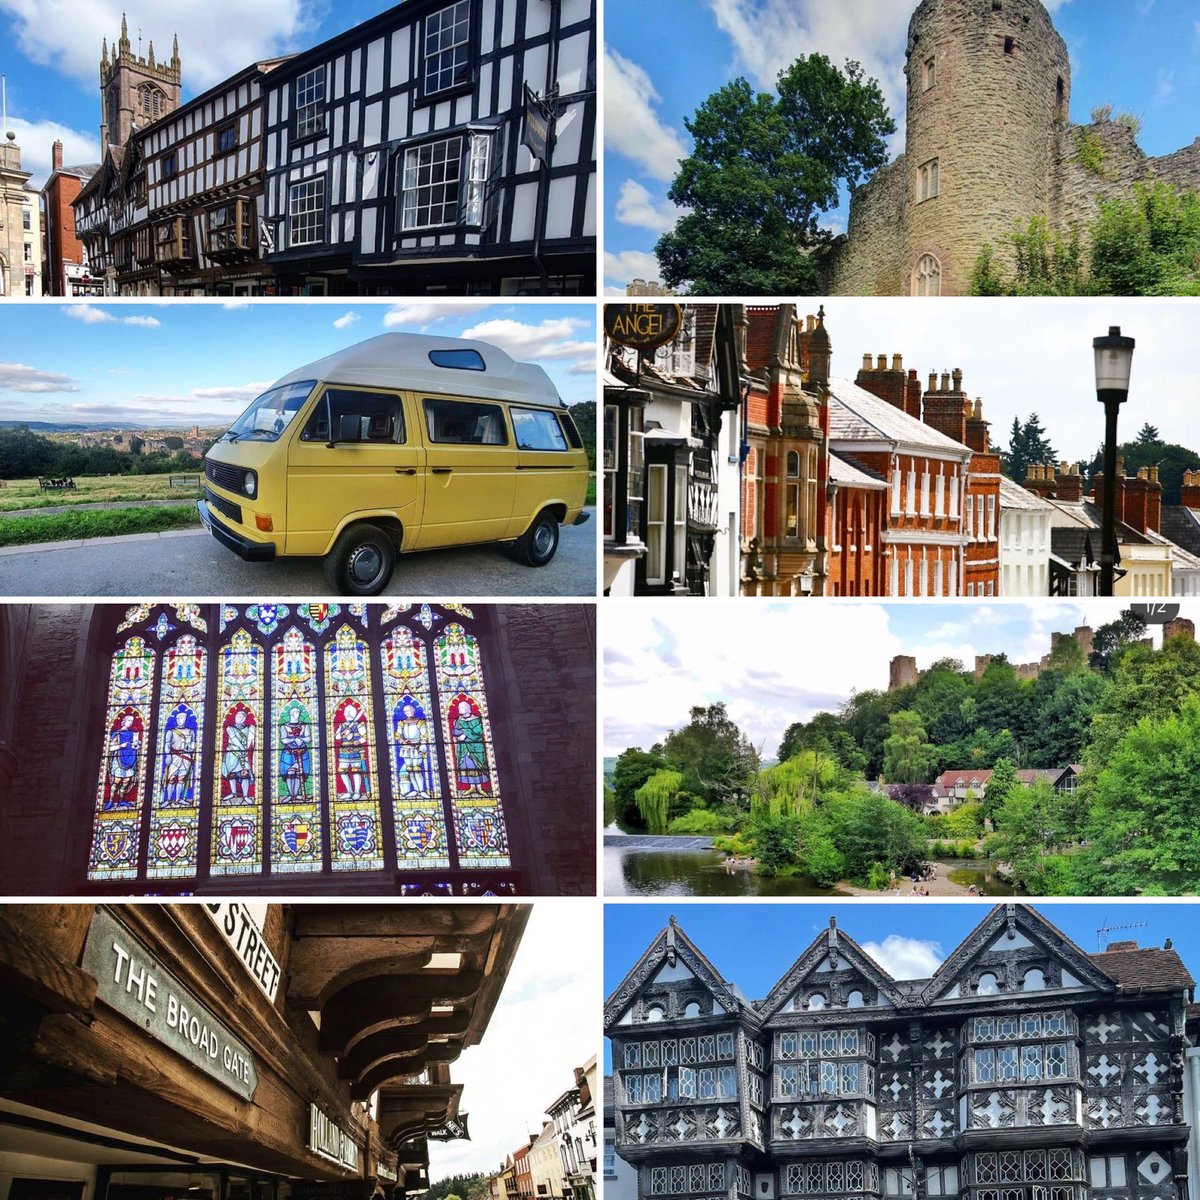 Wishing you a fabulous four-day week! Happy travels, make the most of the last days of summer (come to Ludlow🤩)